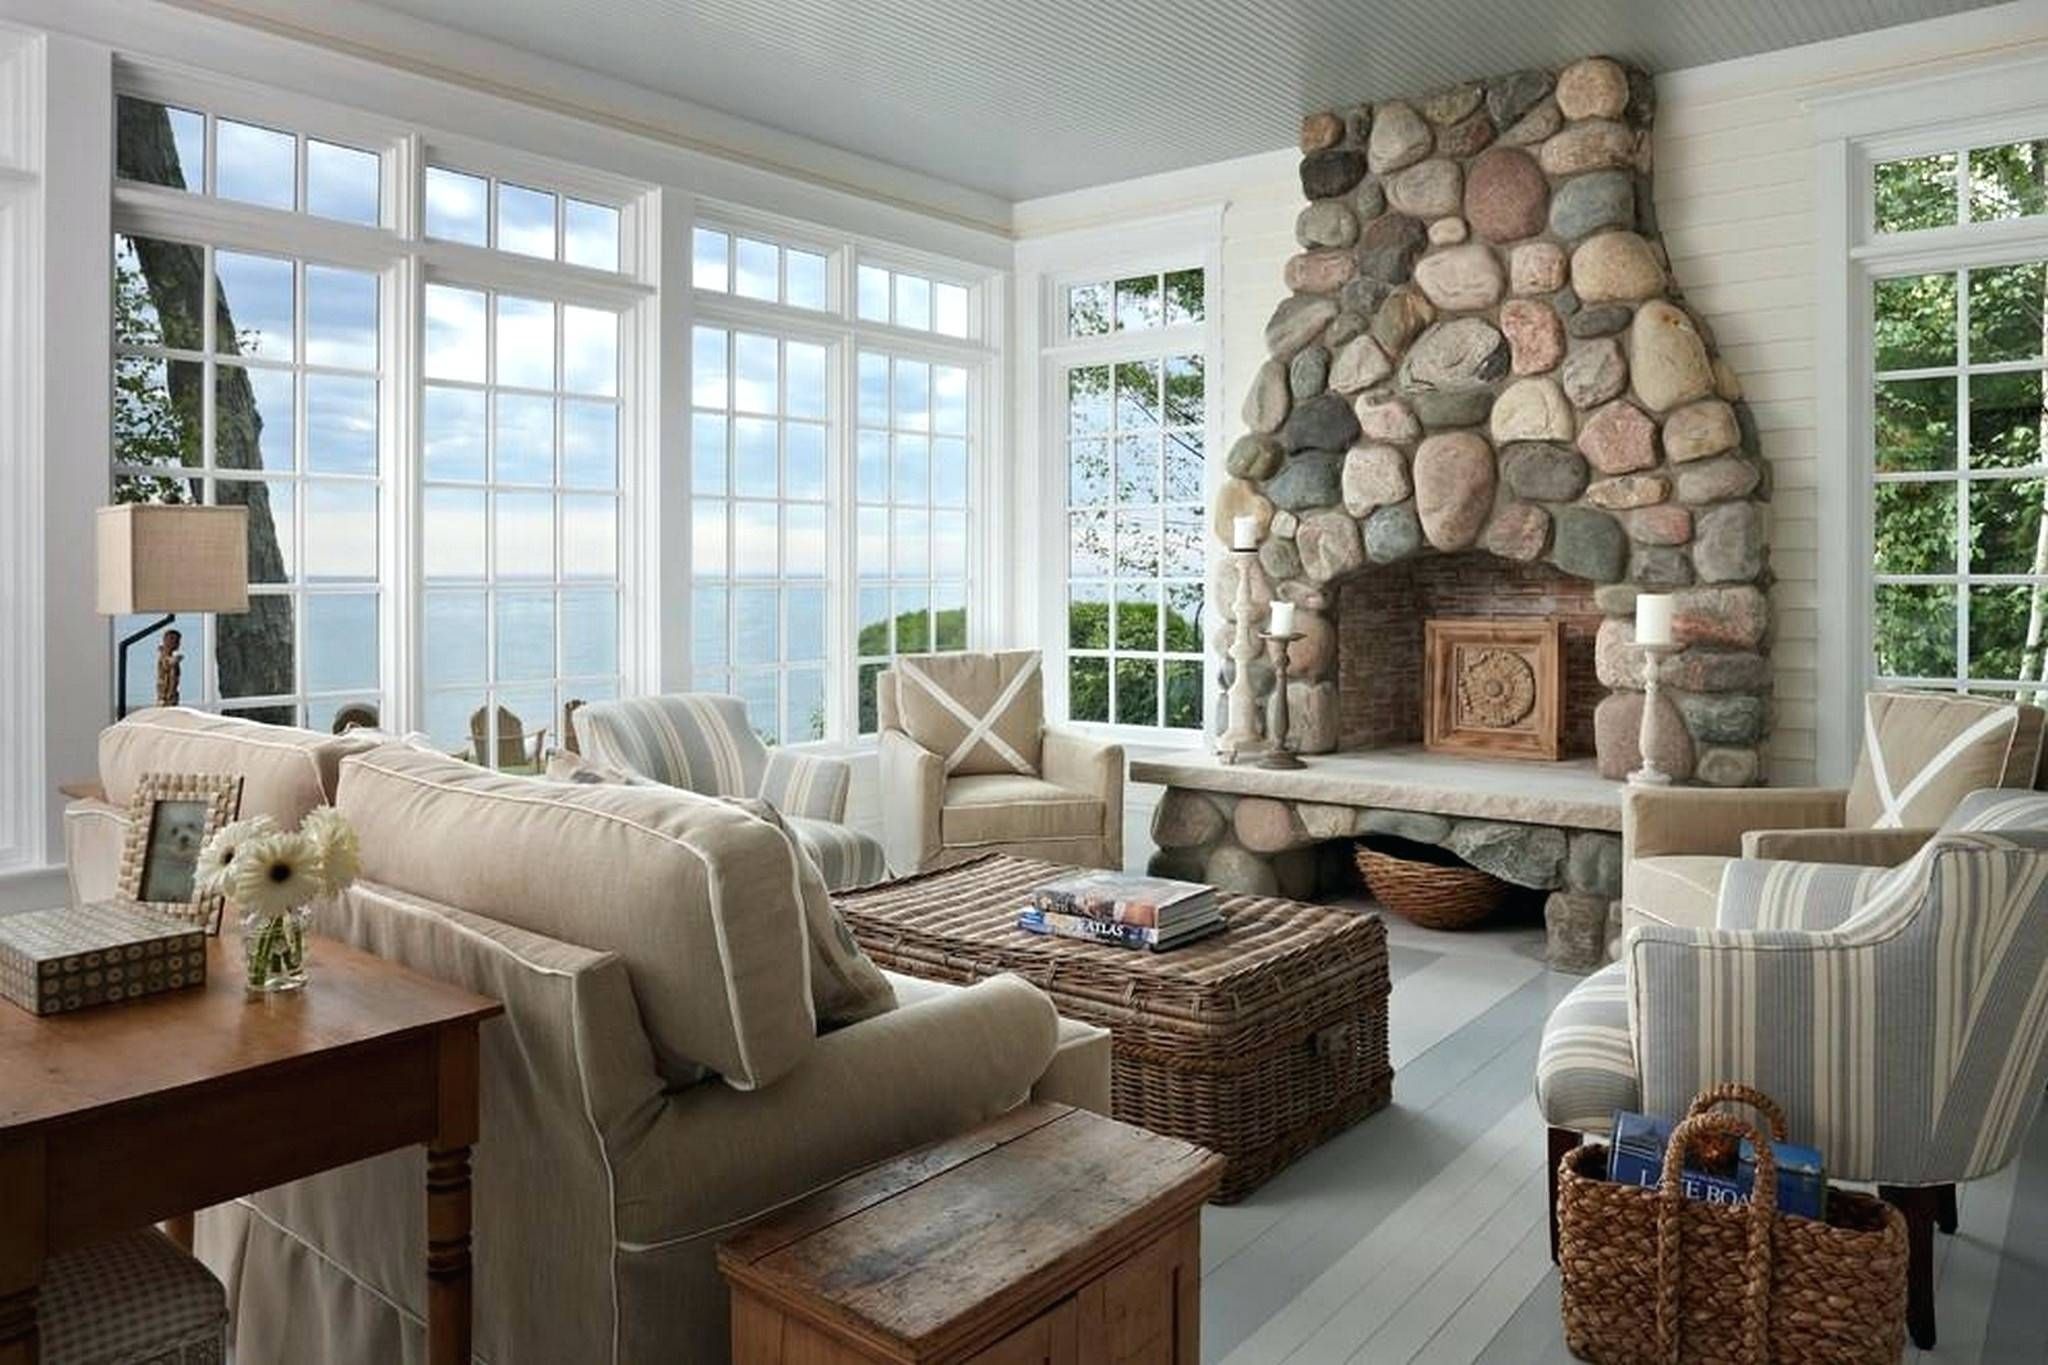 Decorations : Beach Cabin Interior Design Beach Cabin Decorating Within Most Recent Beach Cottage Wall Decors (View 20 of 25)